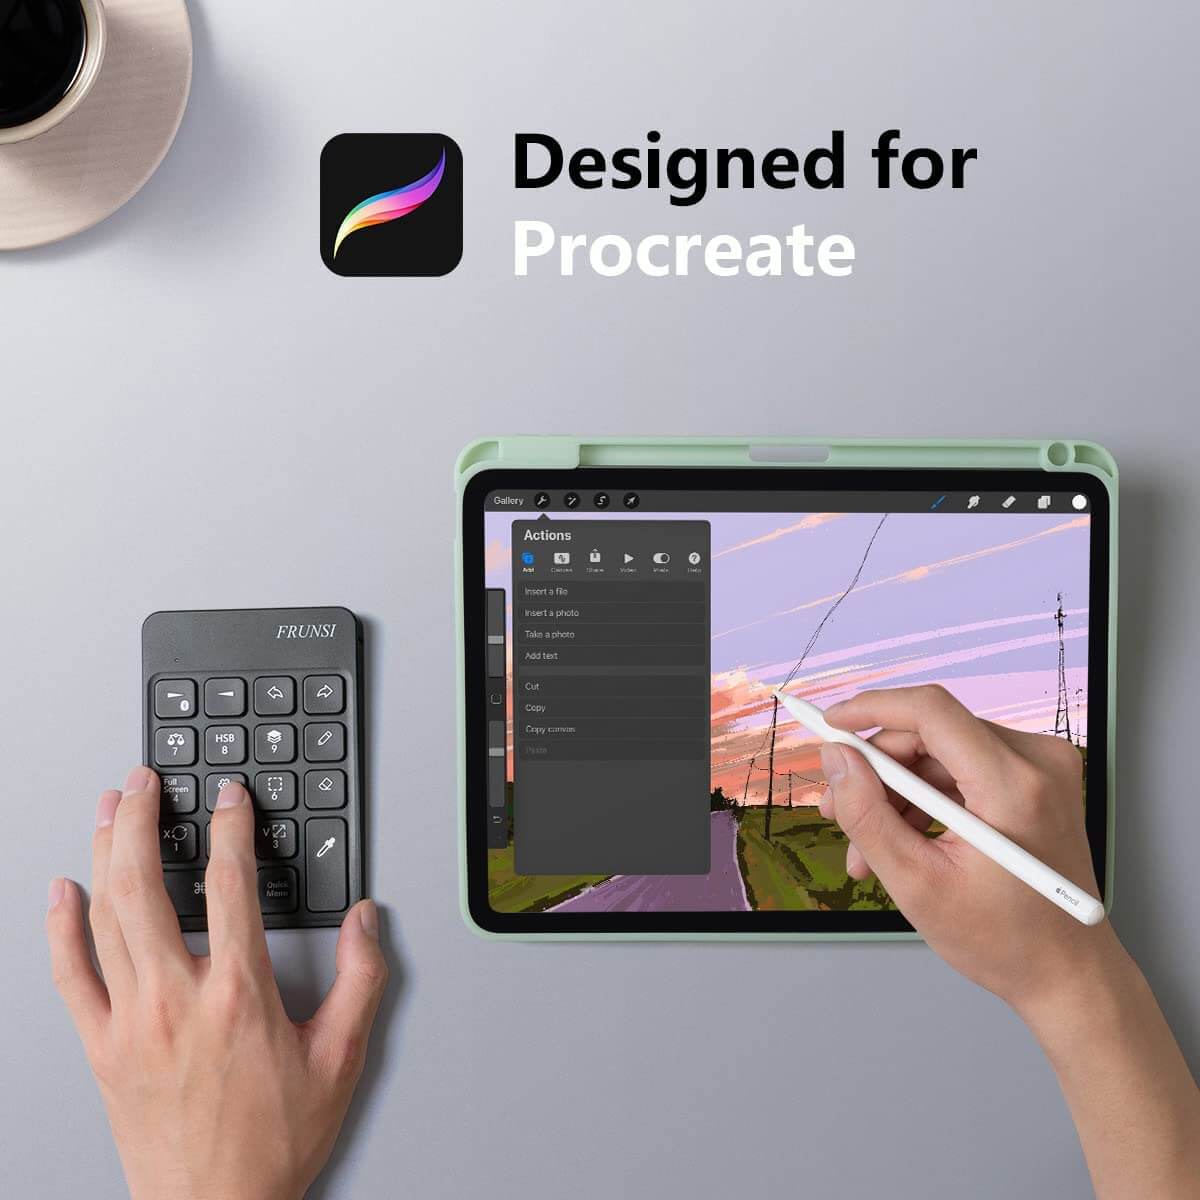 The Frunsi wireless keyboard is specifically designed for Mac OS/IOS Users (match with Ipad, MacBook, Macbook Pro, Macbook Air, etc.). It helps solve a lot of trouble with numeric keyboards when entering data.